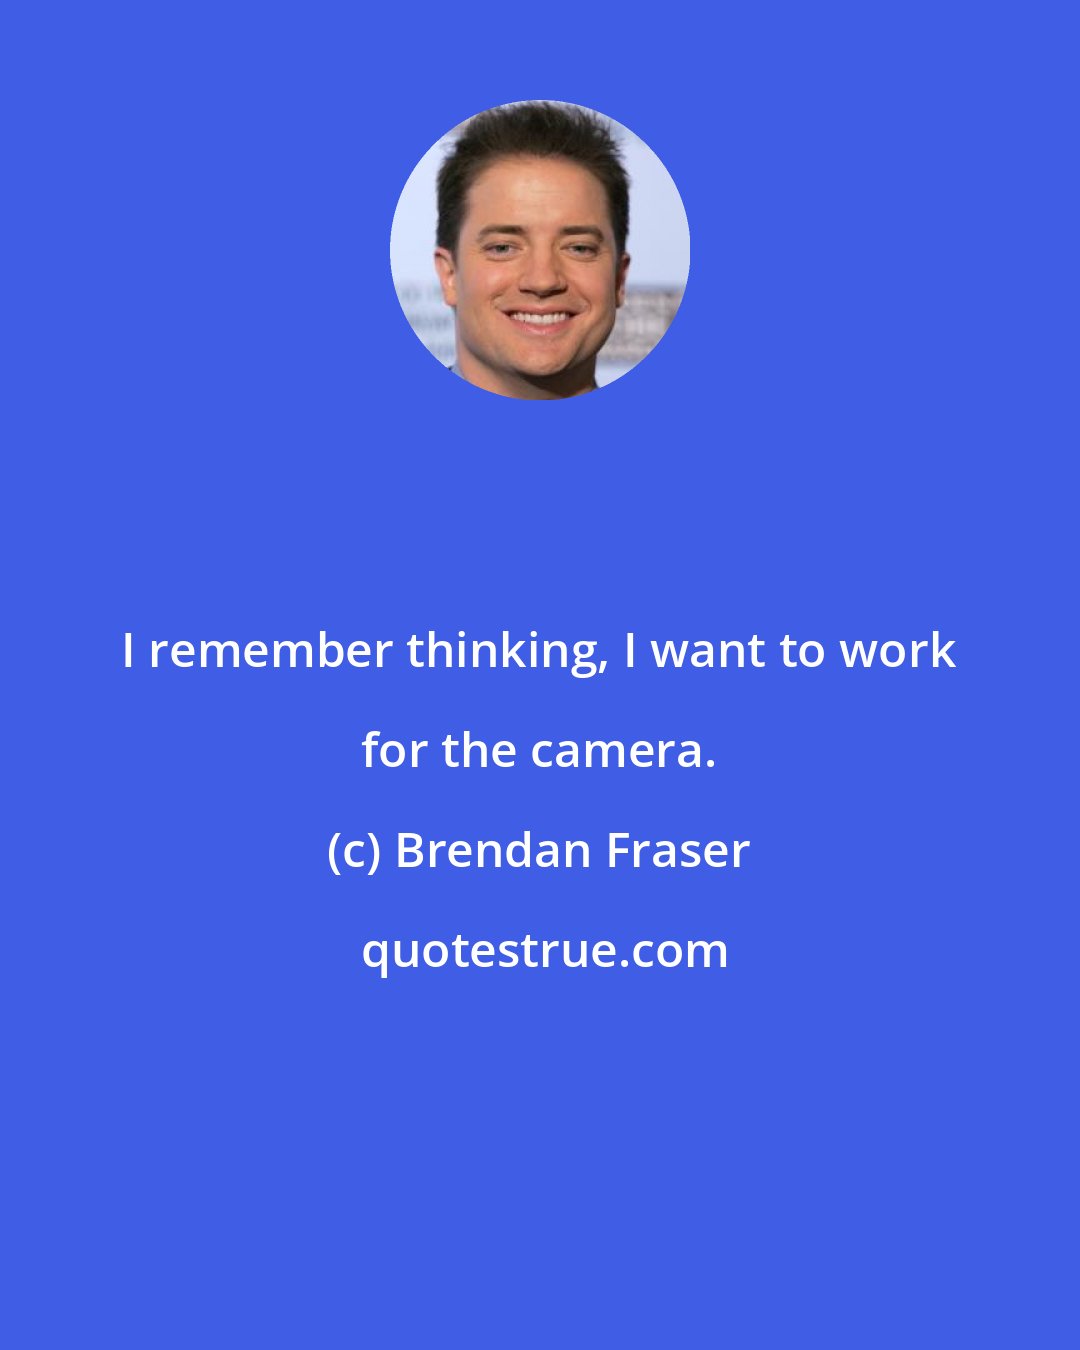 Brendan Fraser: I remember thinking, I want to work for the camera.